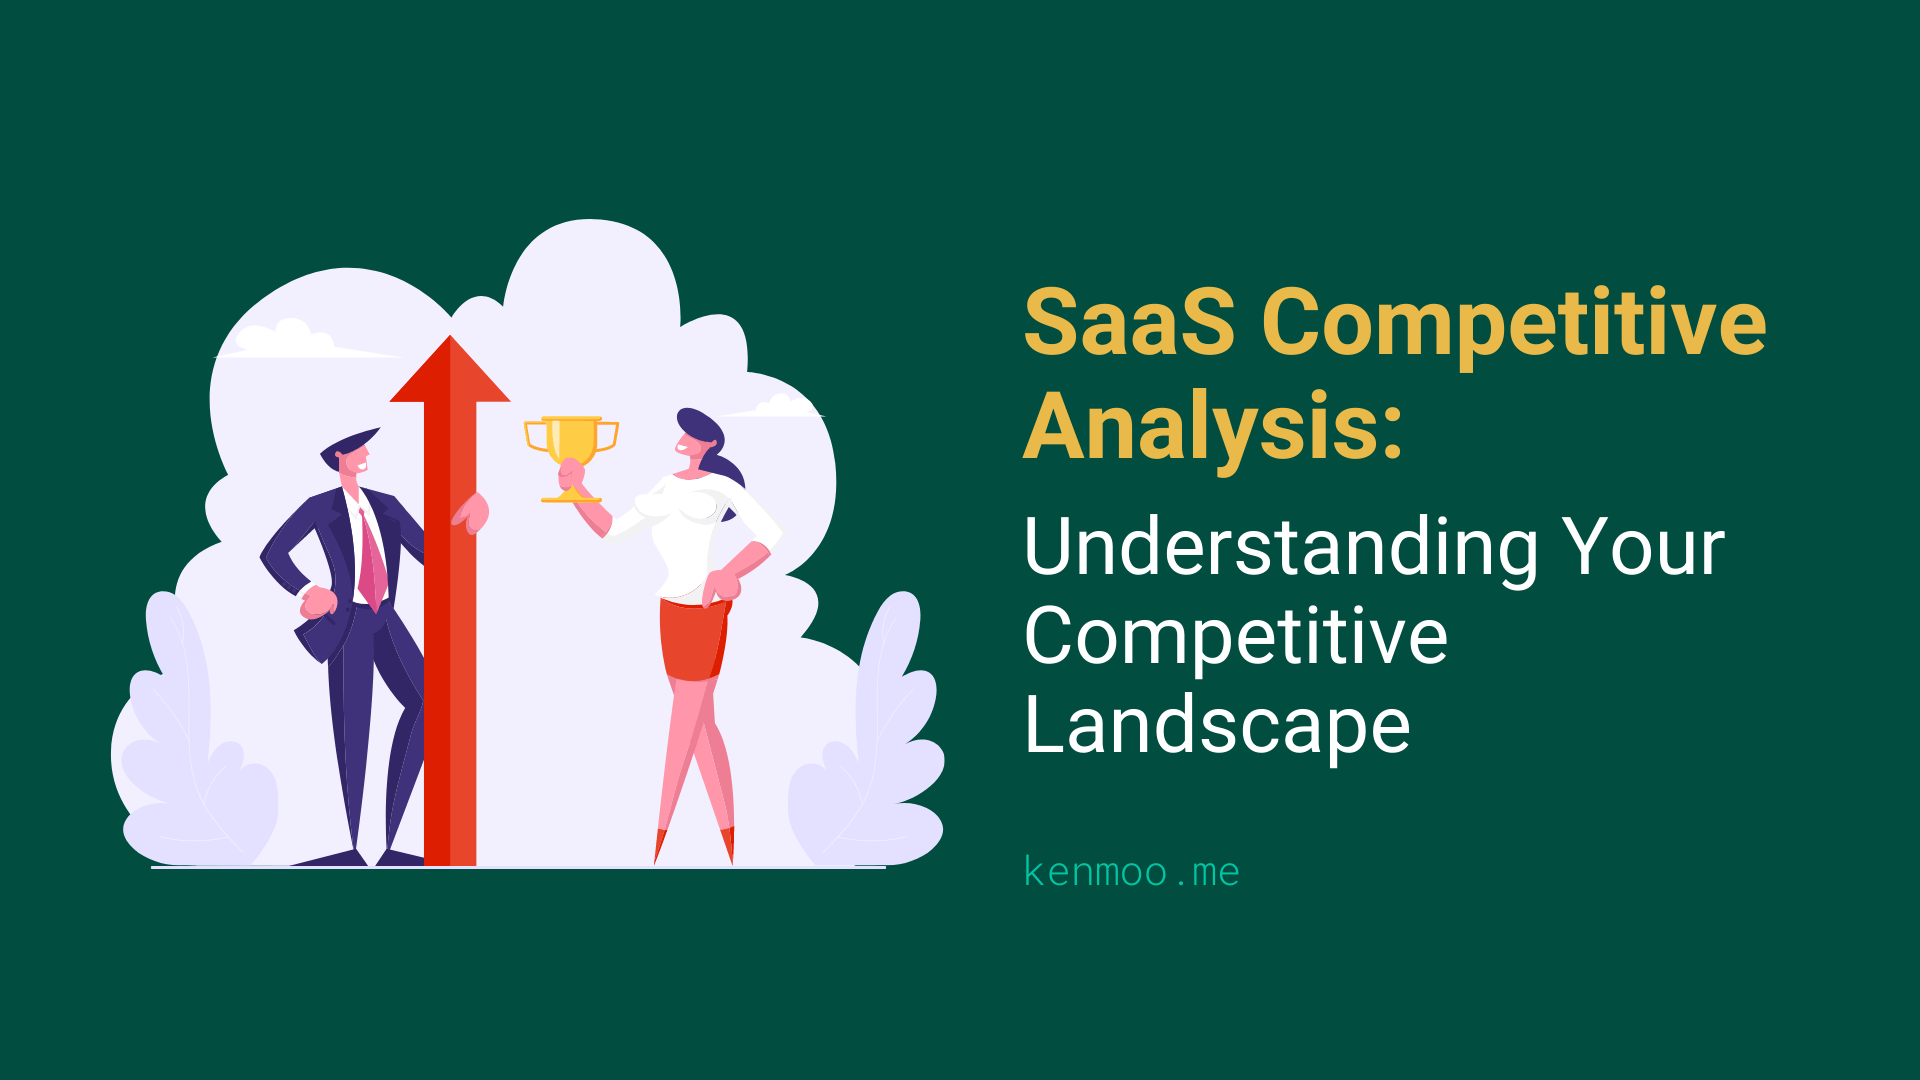 SaaS Competitive Analysis: Understanding Your Competitive Landscape